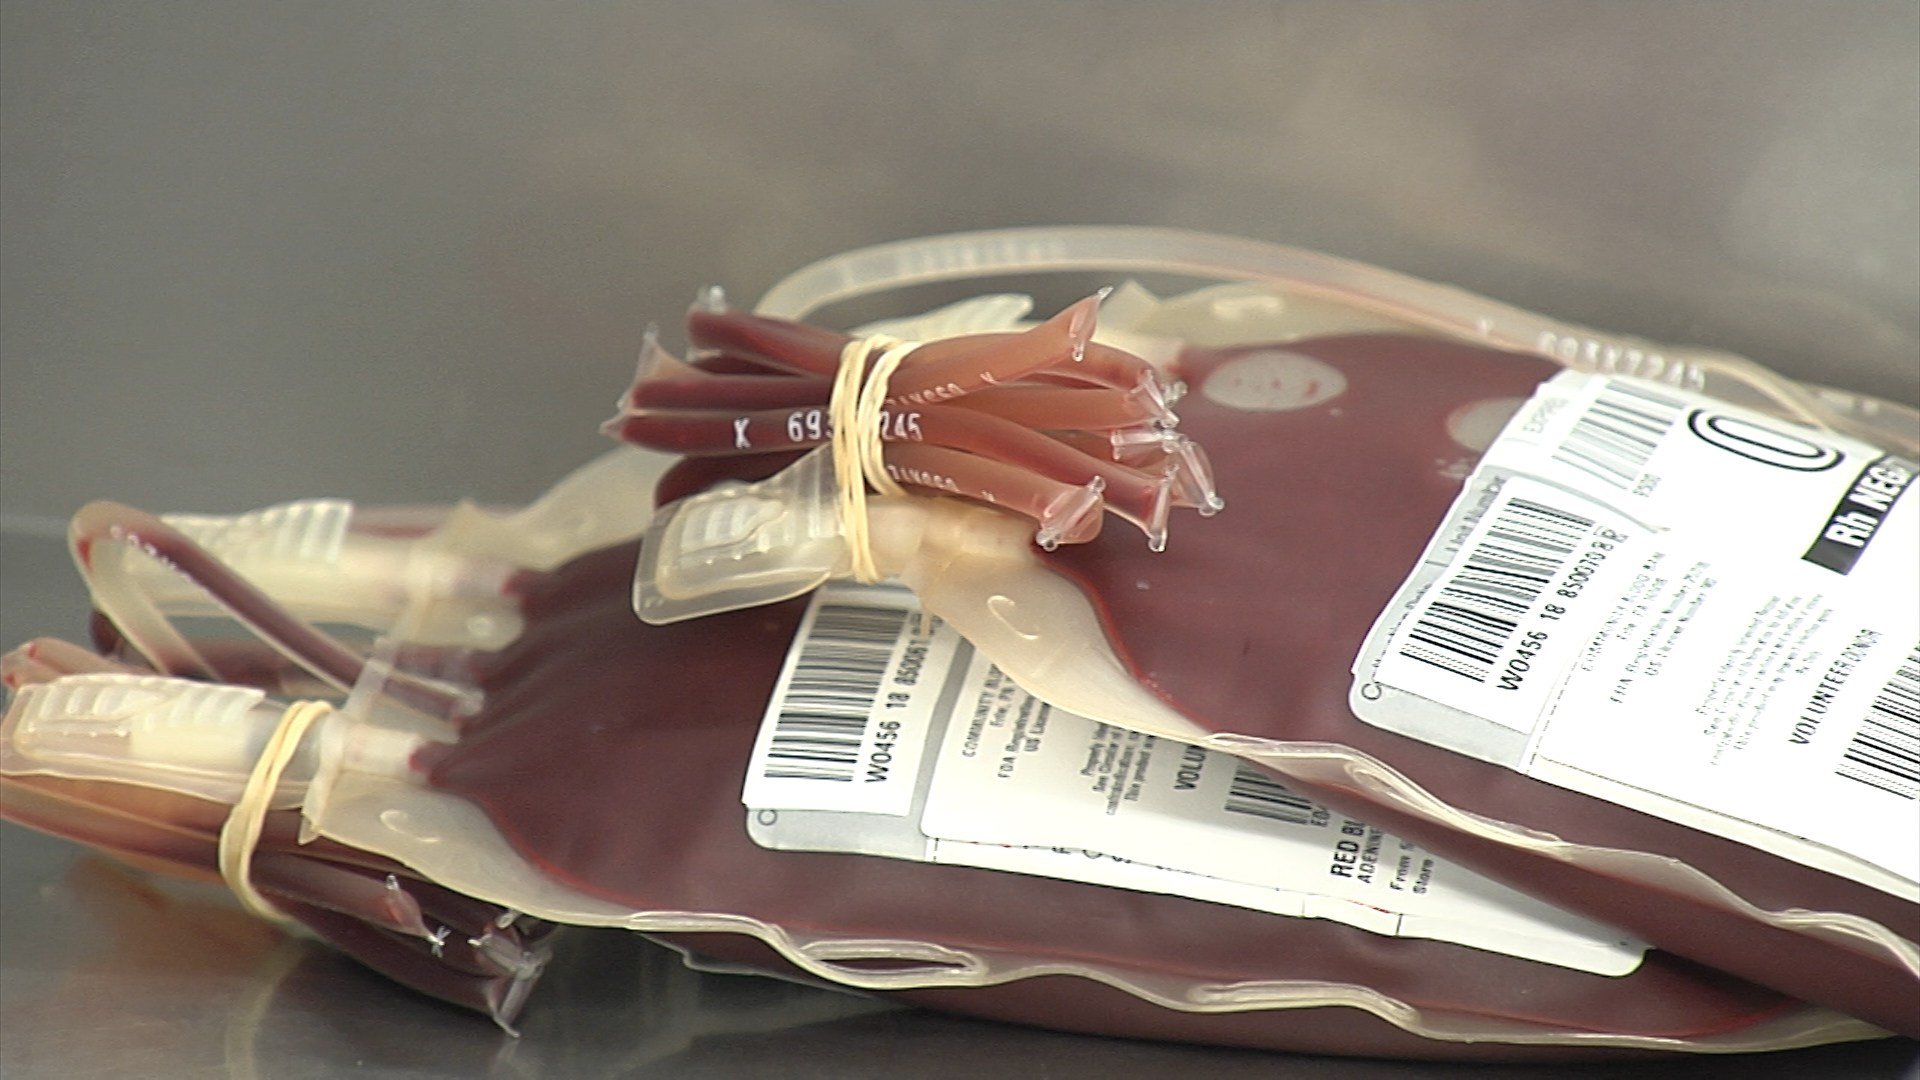 Community Blood Bank Gets $20,000 Gift to Help Increase Donors, Blood Supply